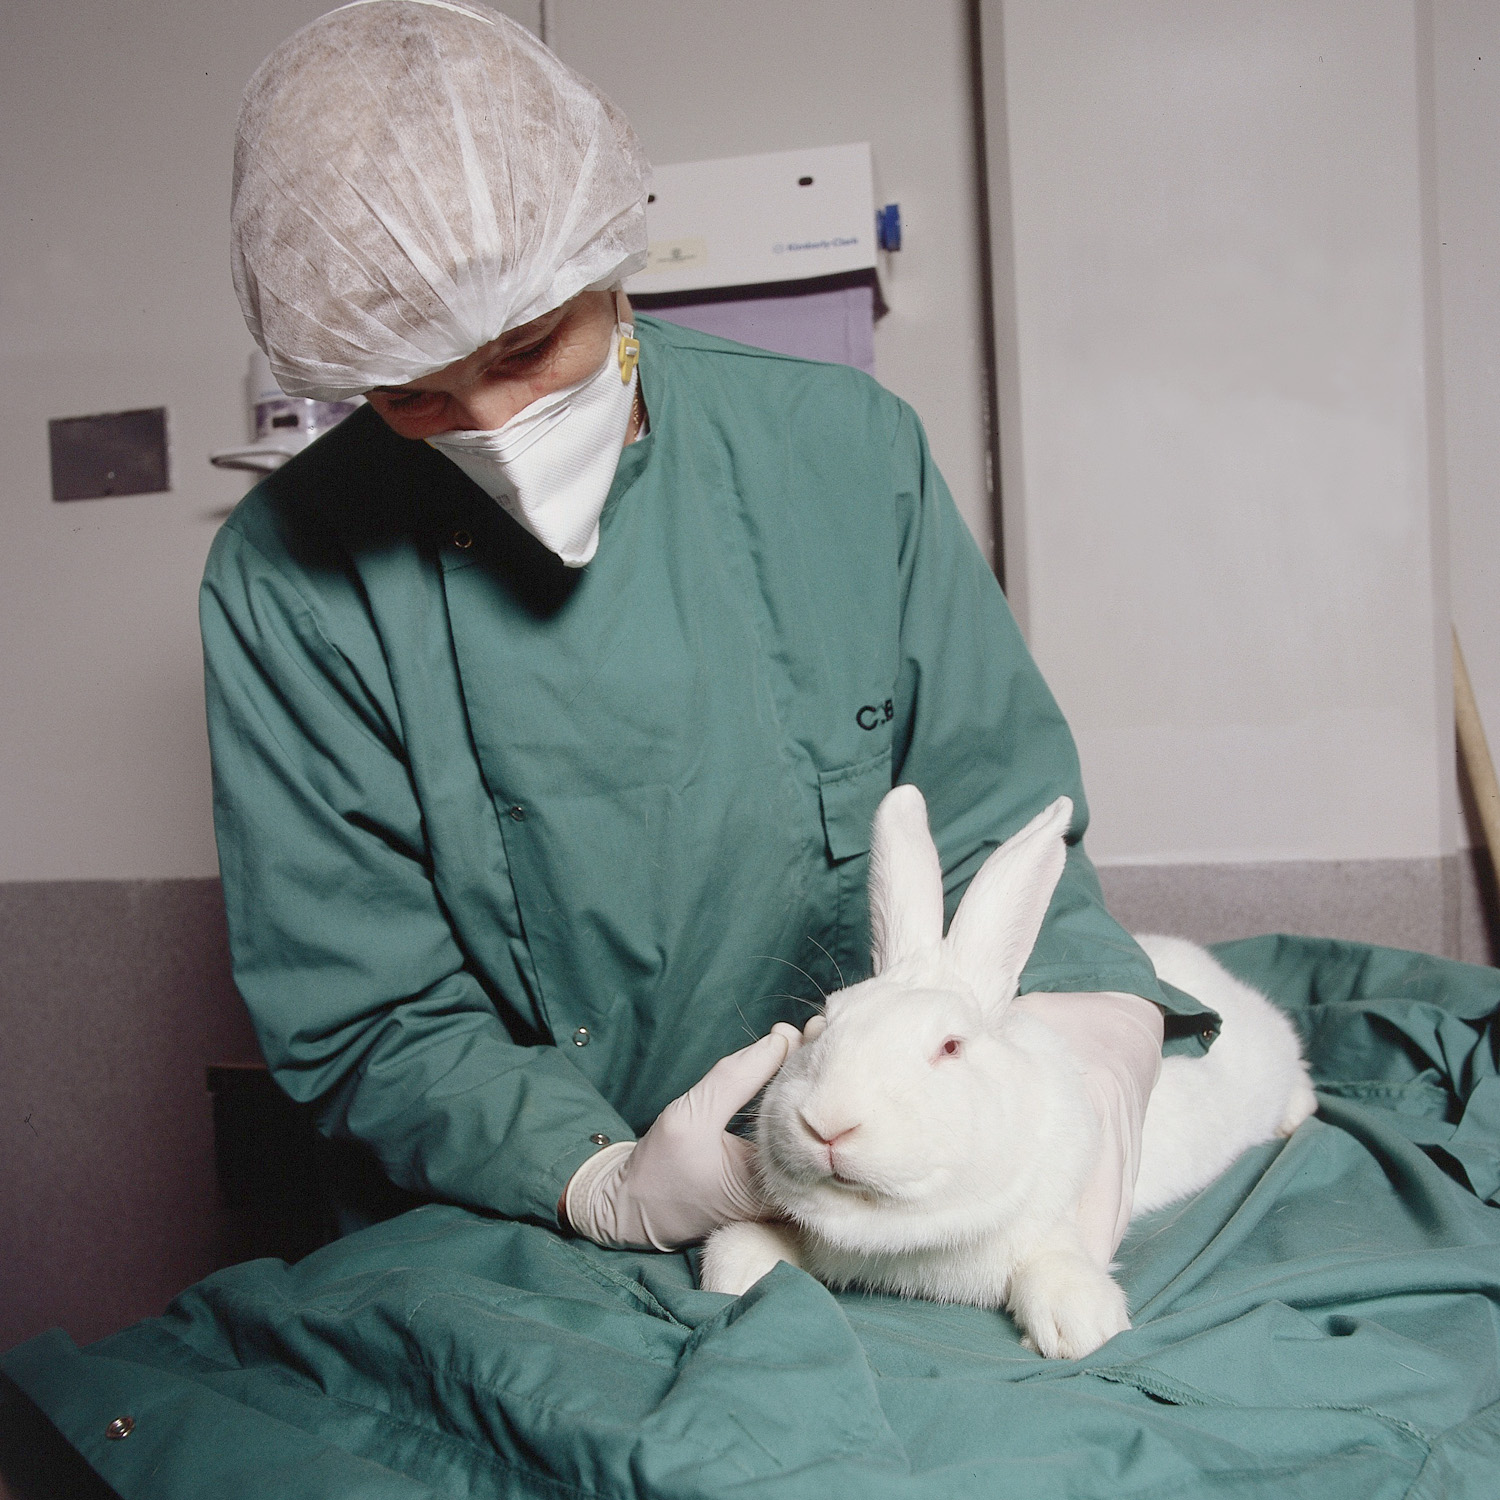 Some Reflections on Animal Experiments  